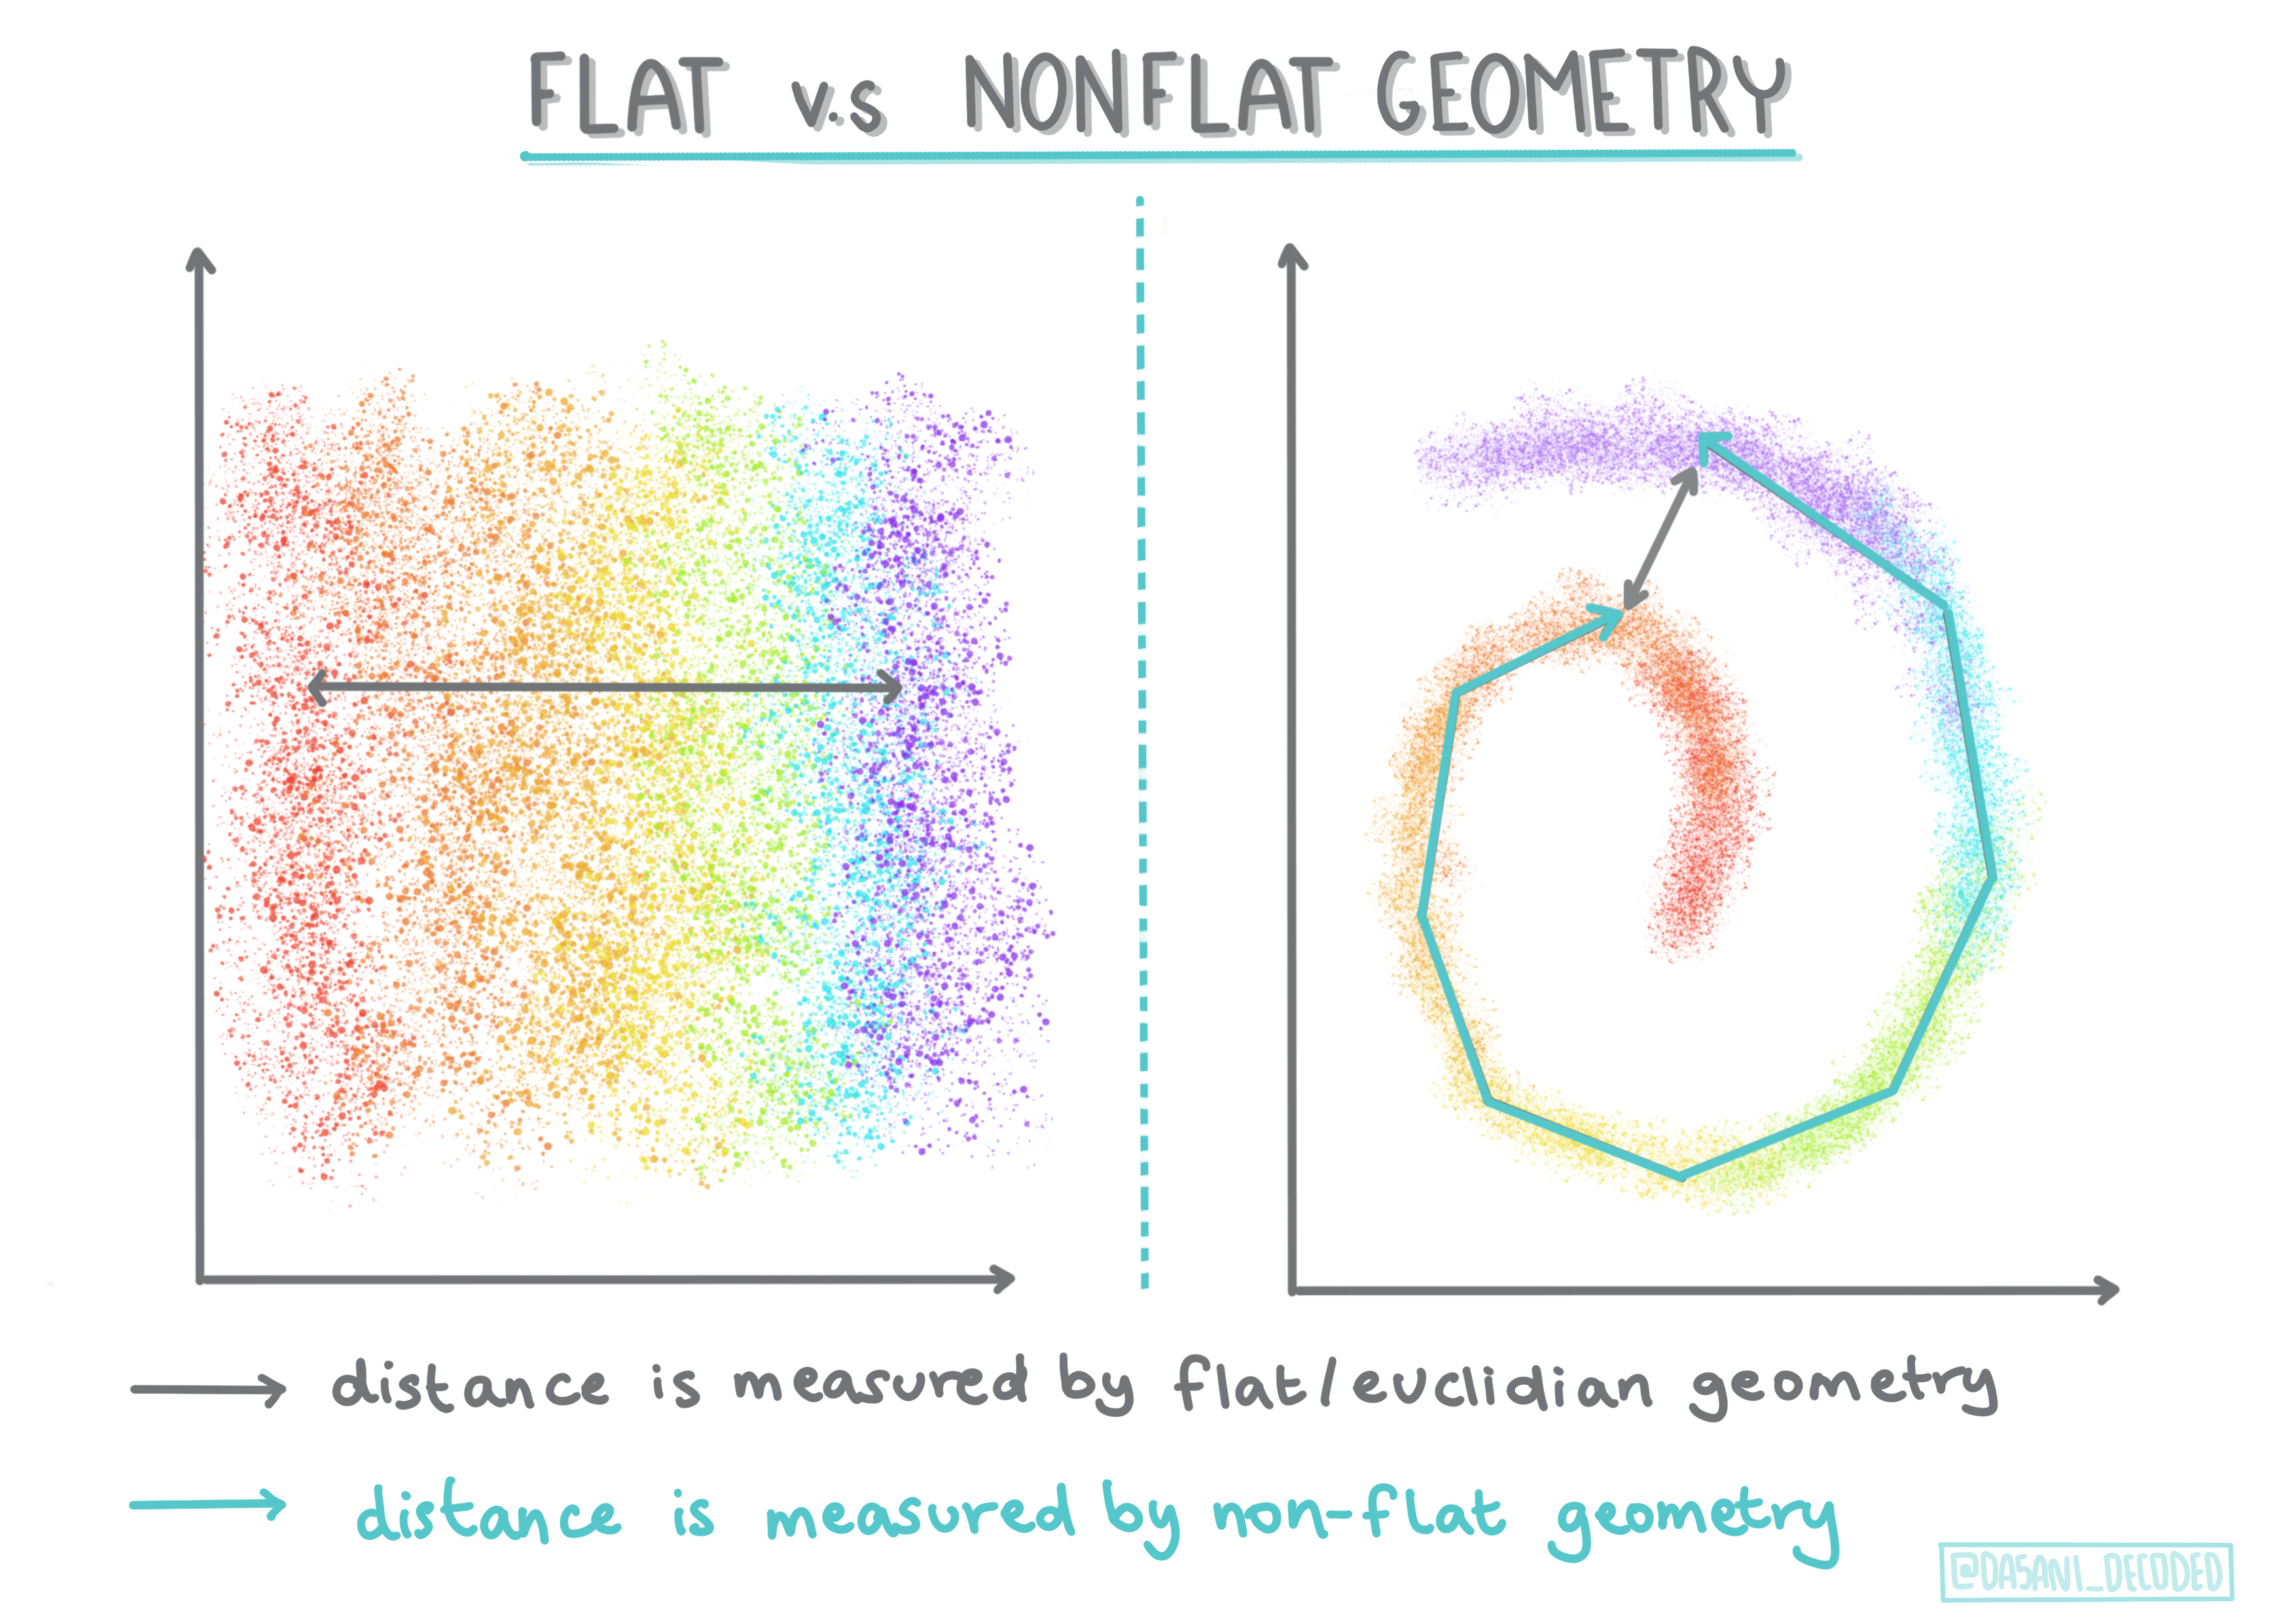 Flat vs Nonflat Geometry Infographic